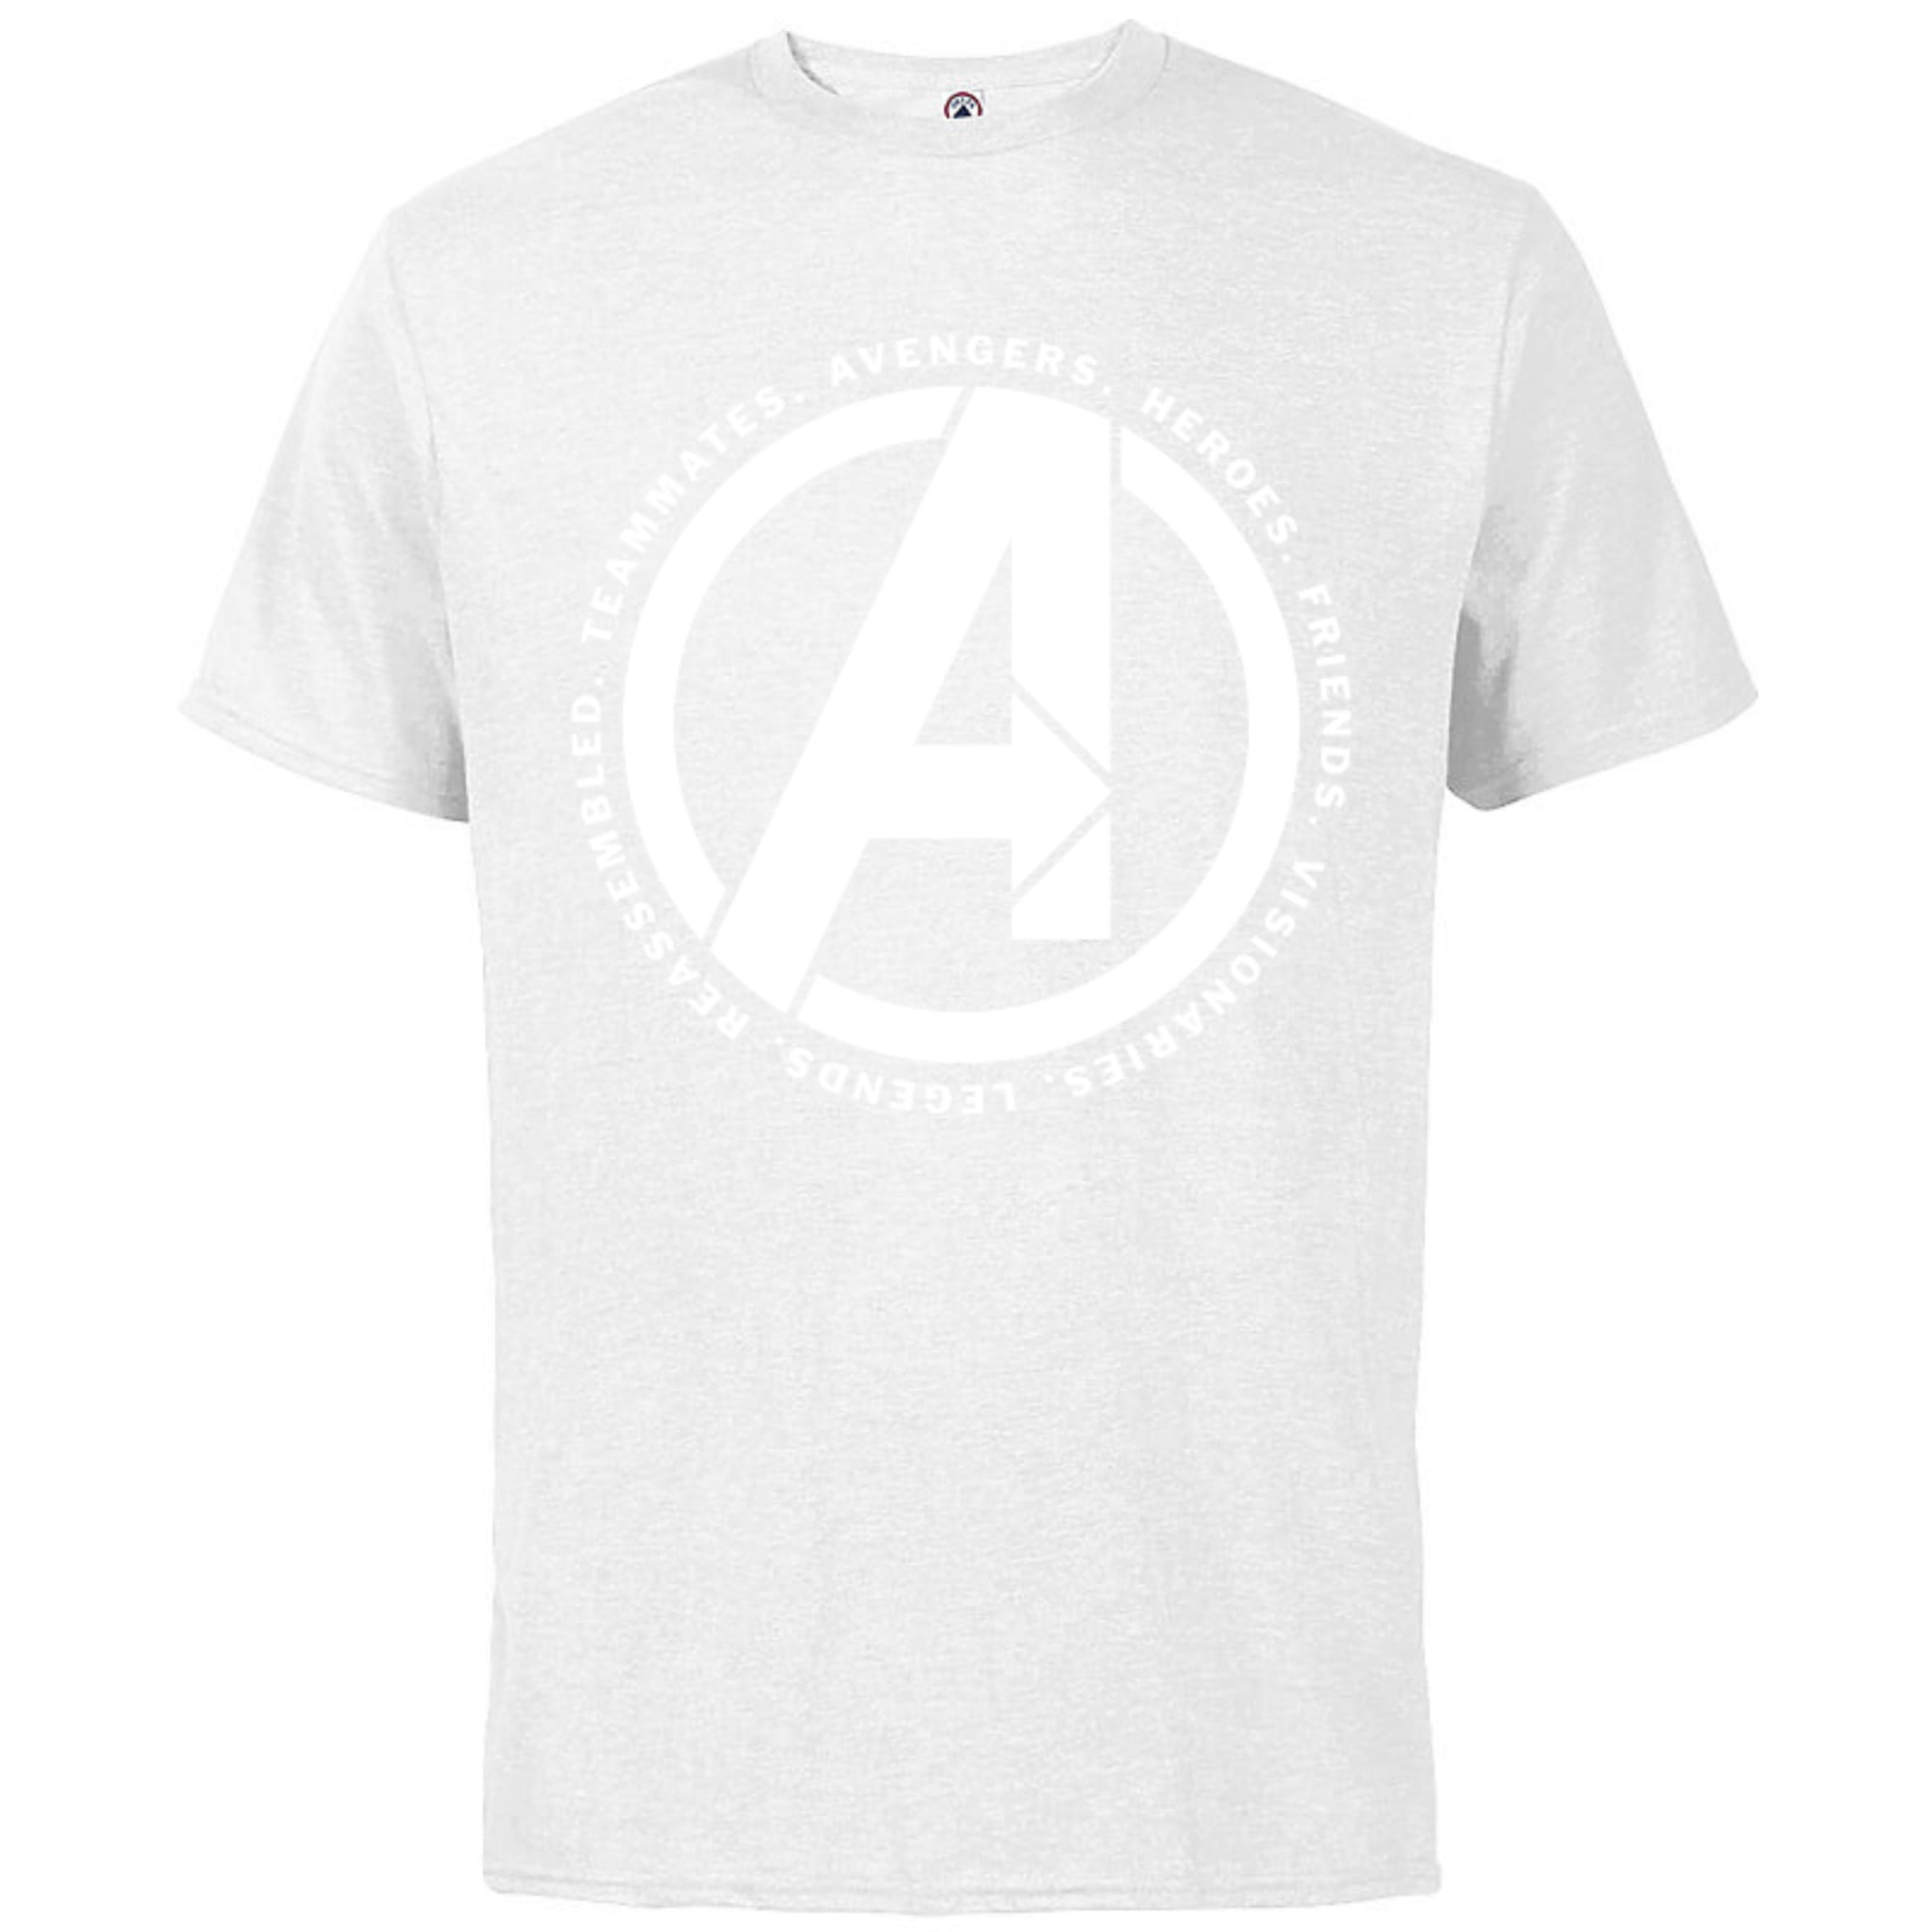 - Shirt Logo Avengers: Sleeve - T- for Cotton Customized-Black Legends Endgame Adults Short and Marvel Heroes